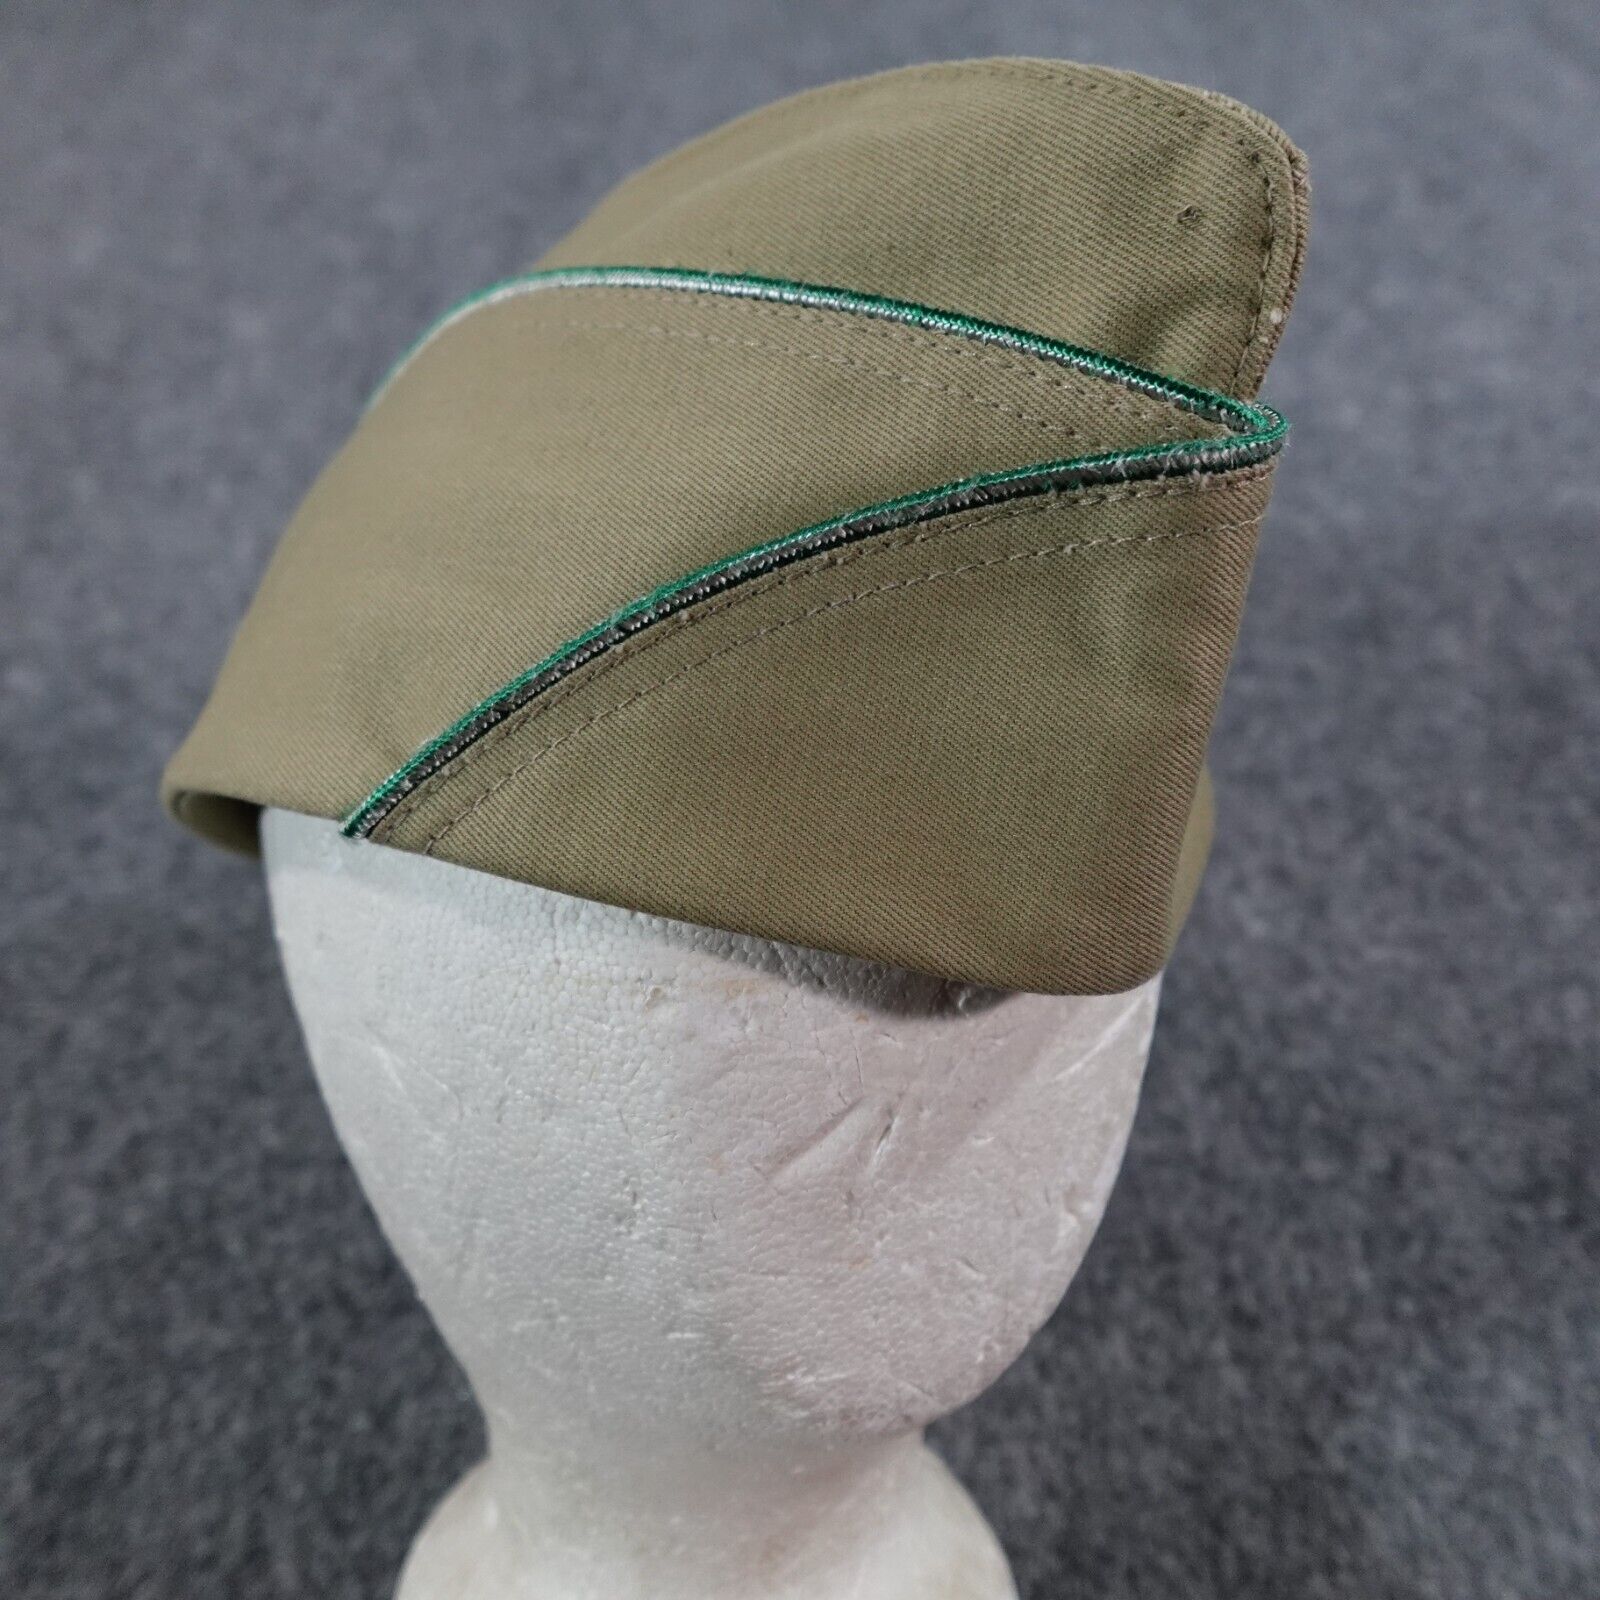 WW2 US Army Officers Tan Green Piped Garrison Cap Size 7 5/8 USA Made